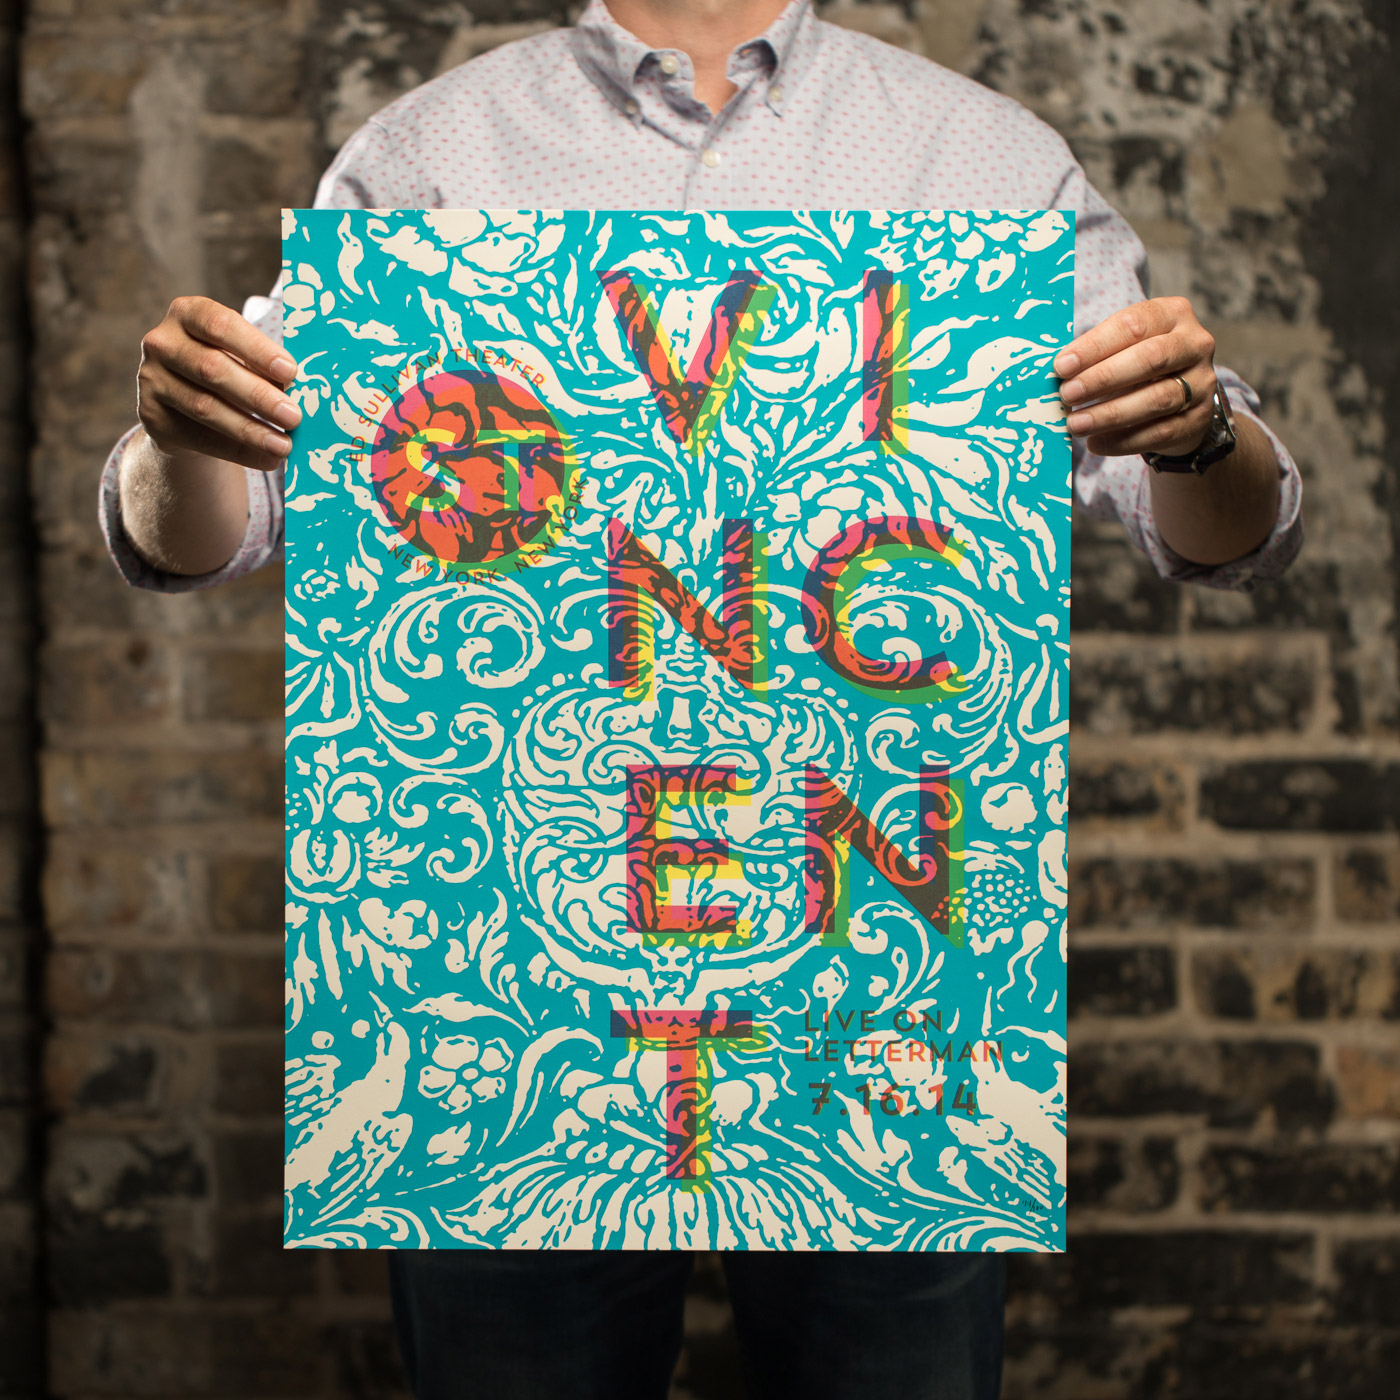 St. Vincent concert poster from the Ed Sullivan Theater in New York, New York. Available at Rockonpaper.com